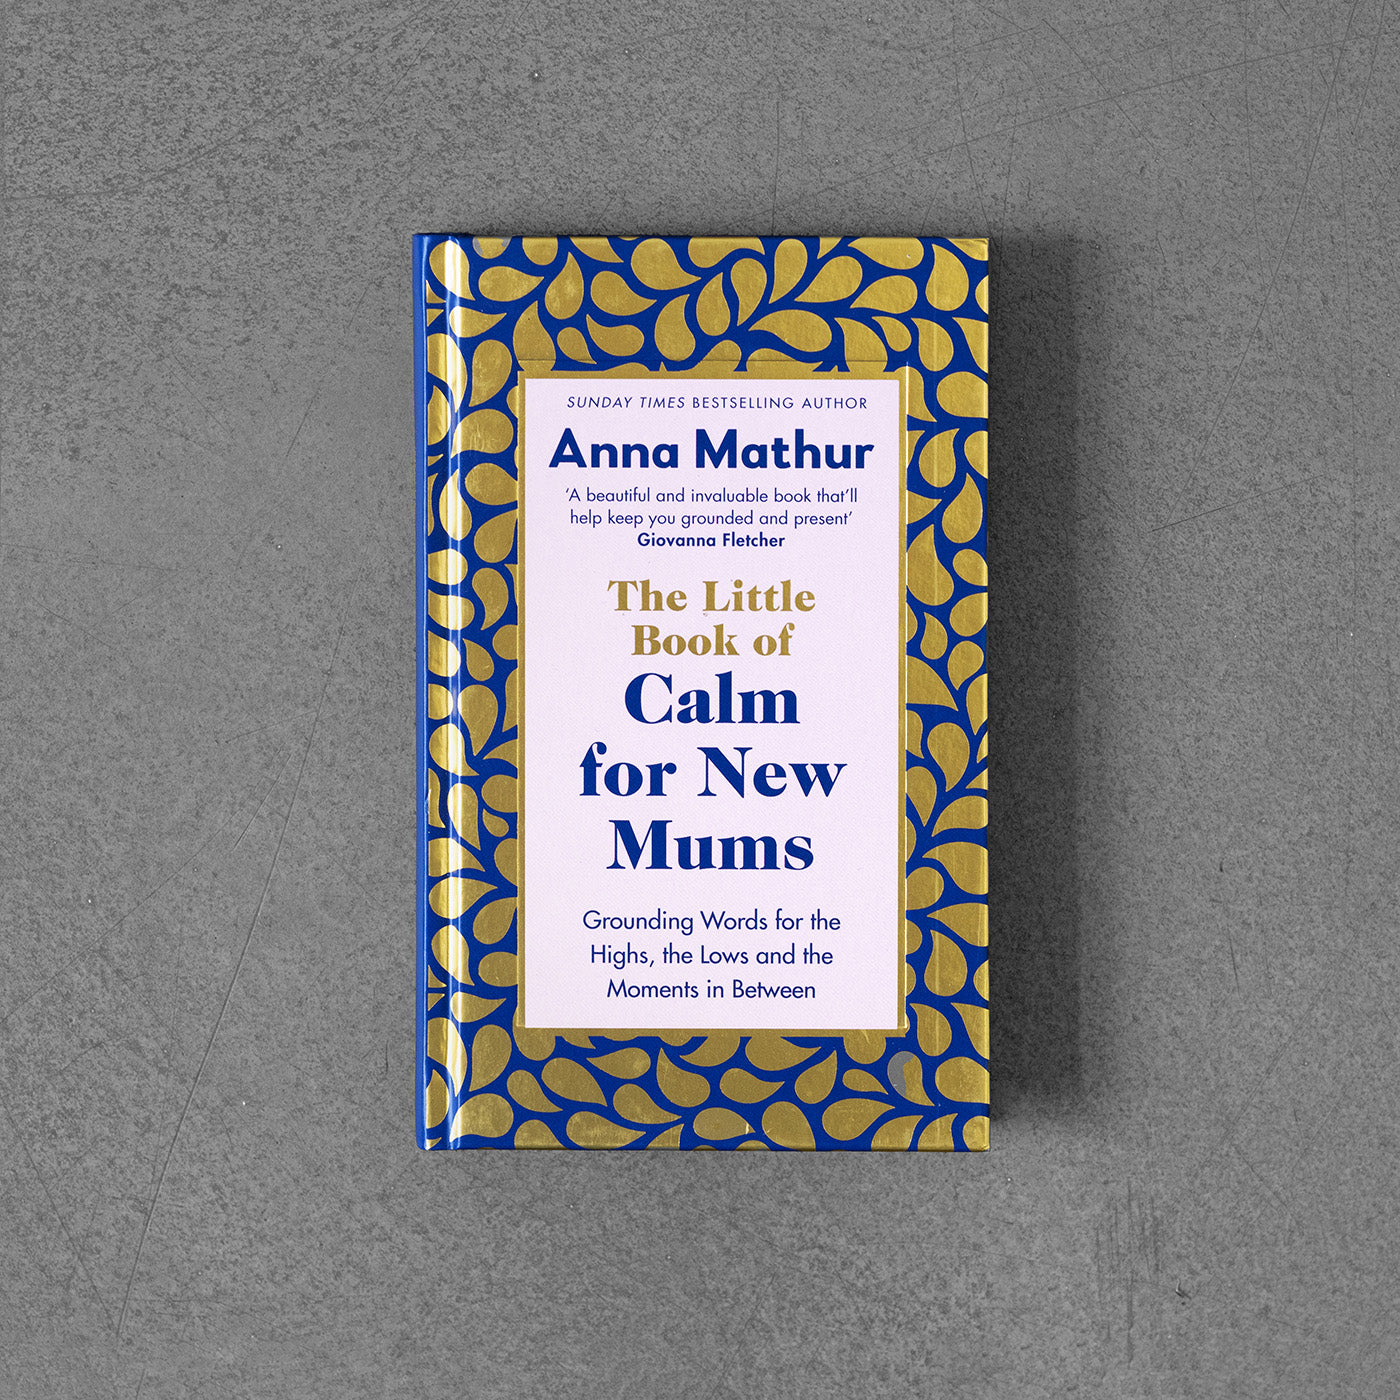 The Little Book of Calm for New Mums